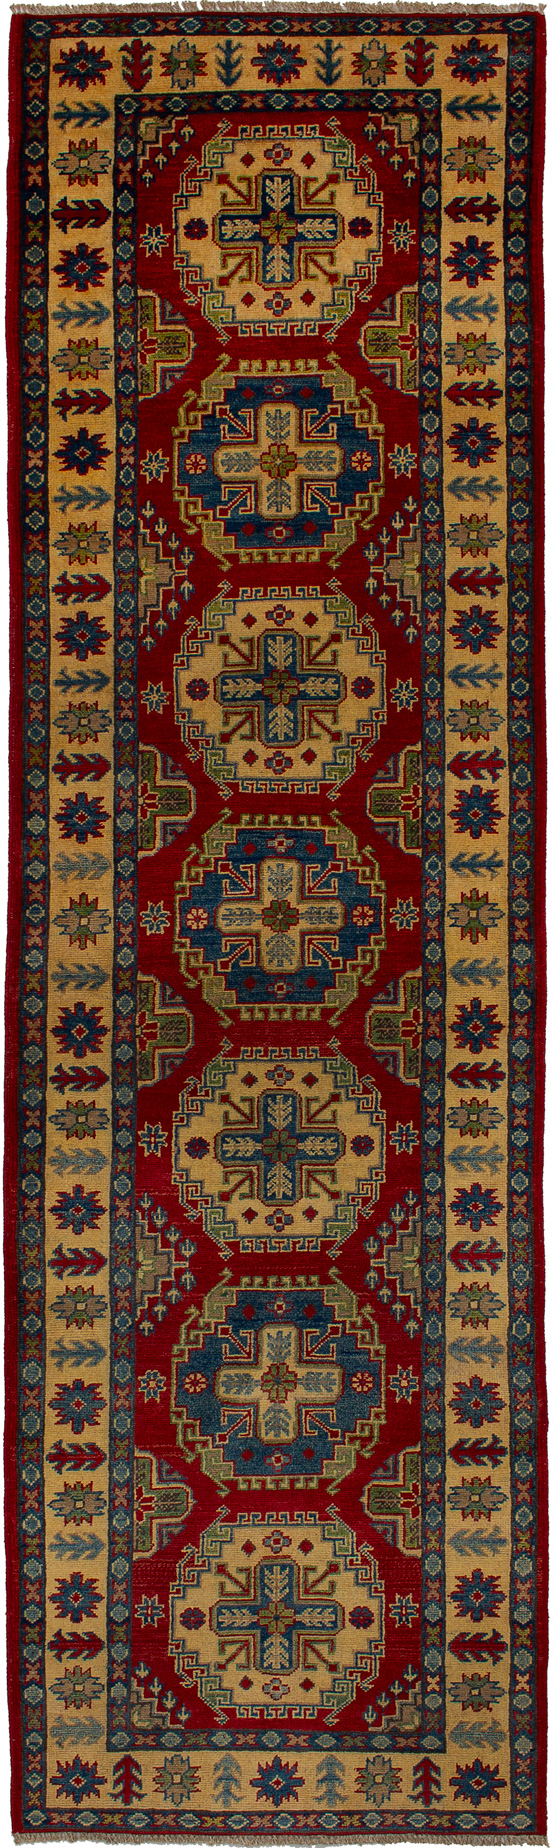 Hand-knotted Finest Gazni Red Wool Rug 2'9" x 9'8"  Size: 2'9" x 9'8"  